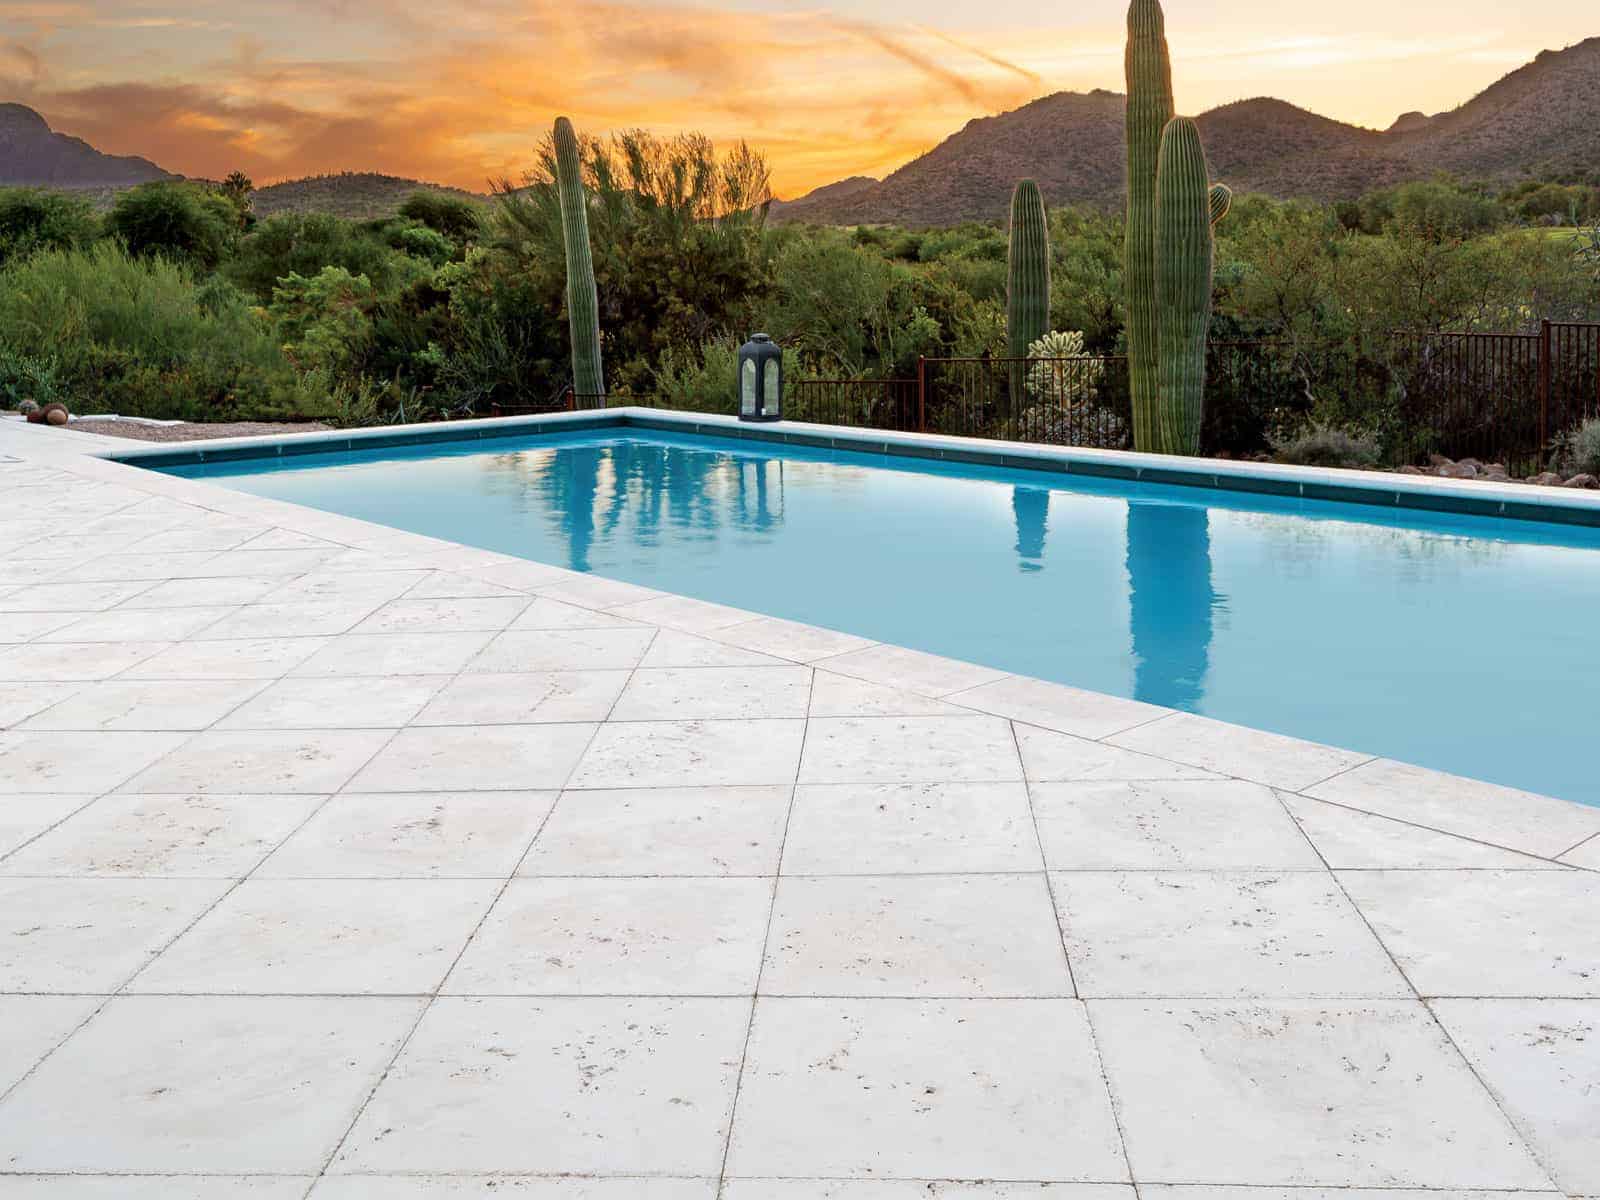 Swimming Pool With Concrete Pavers, Pool Deck Tiles